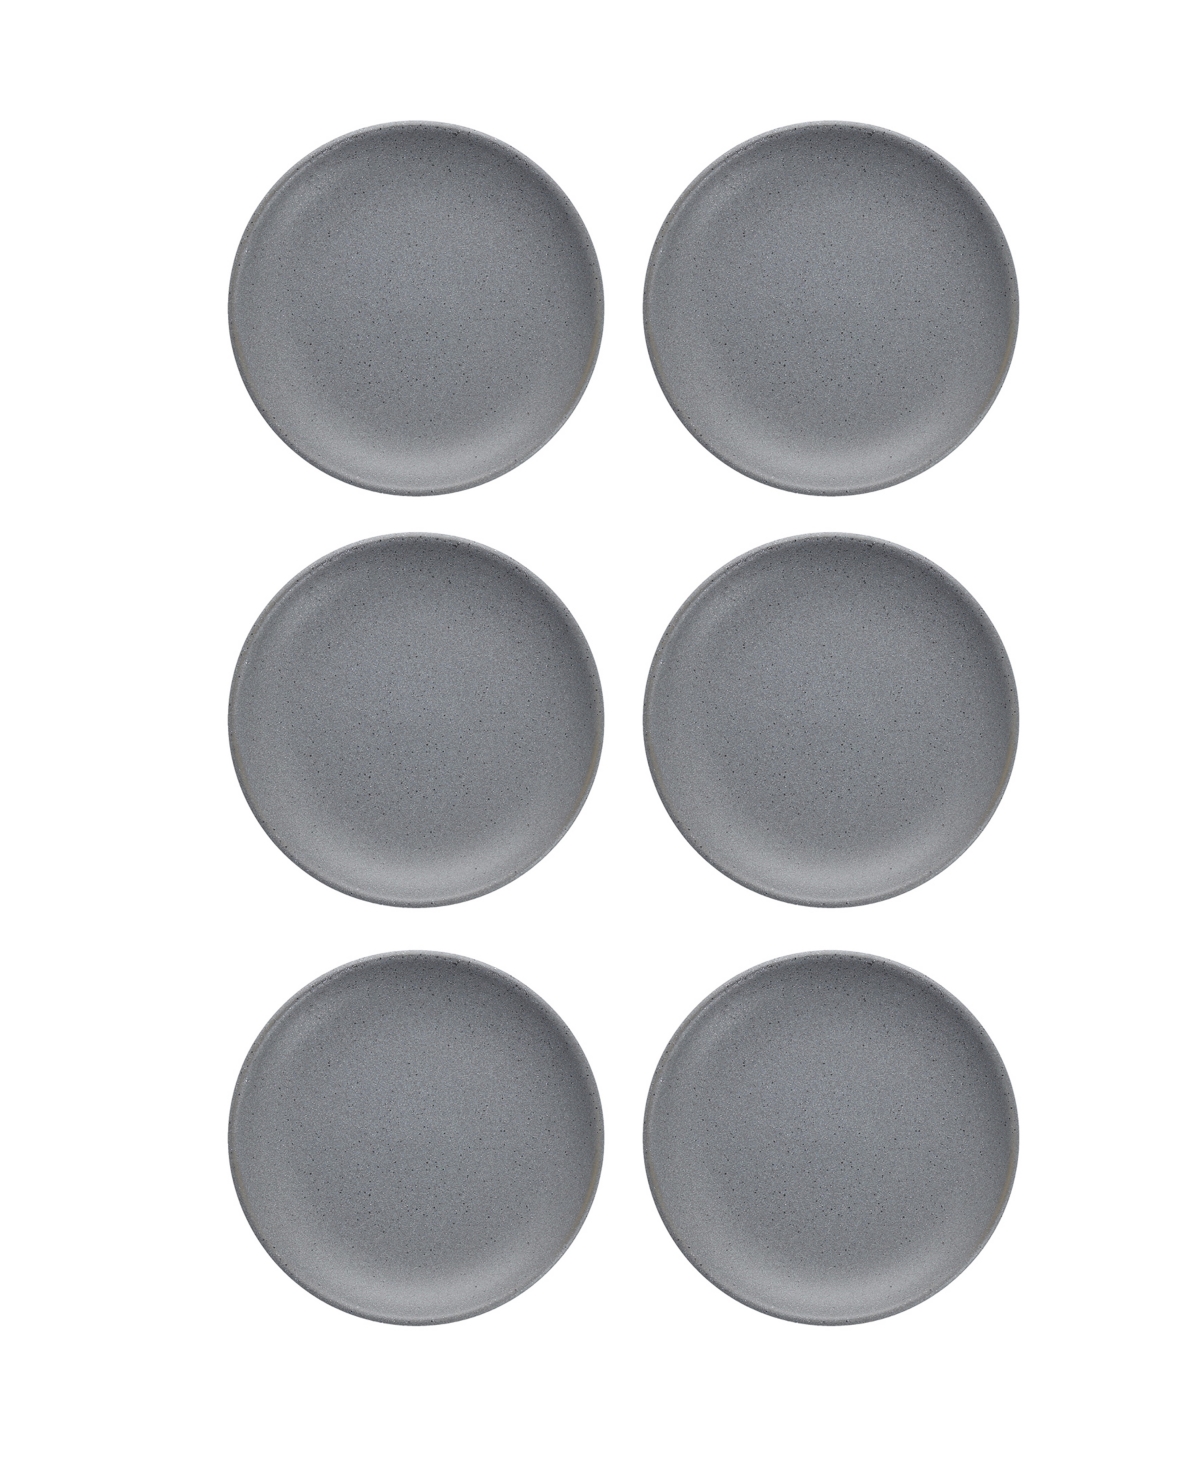 Sound Cement Coupe 6" 6 Piece Bead & Butter Plate Set, Service for 6 - Cement